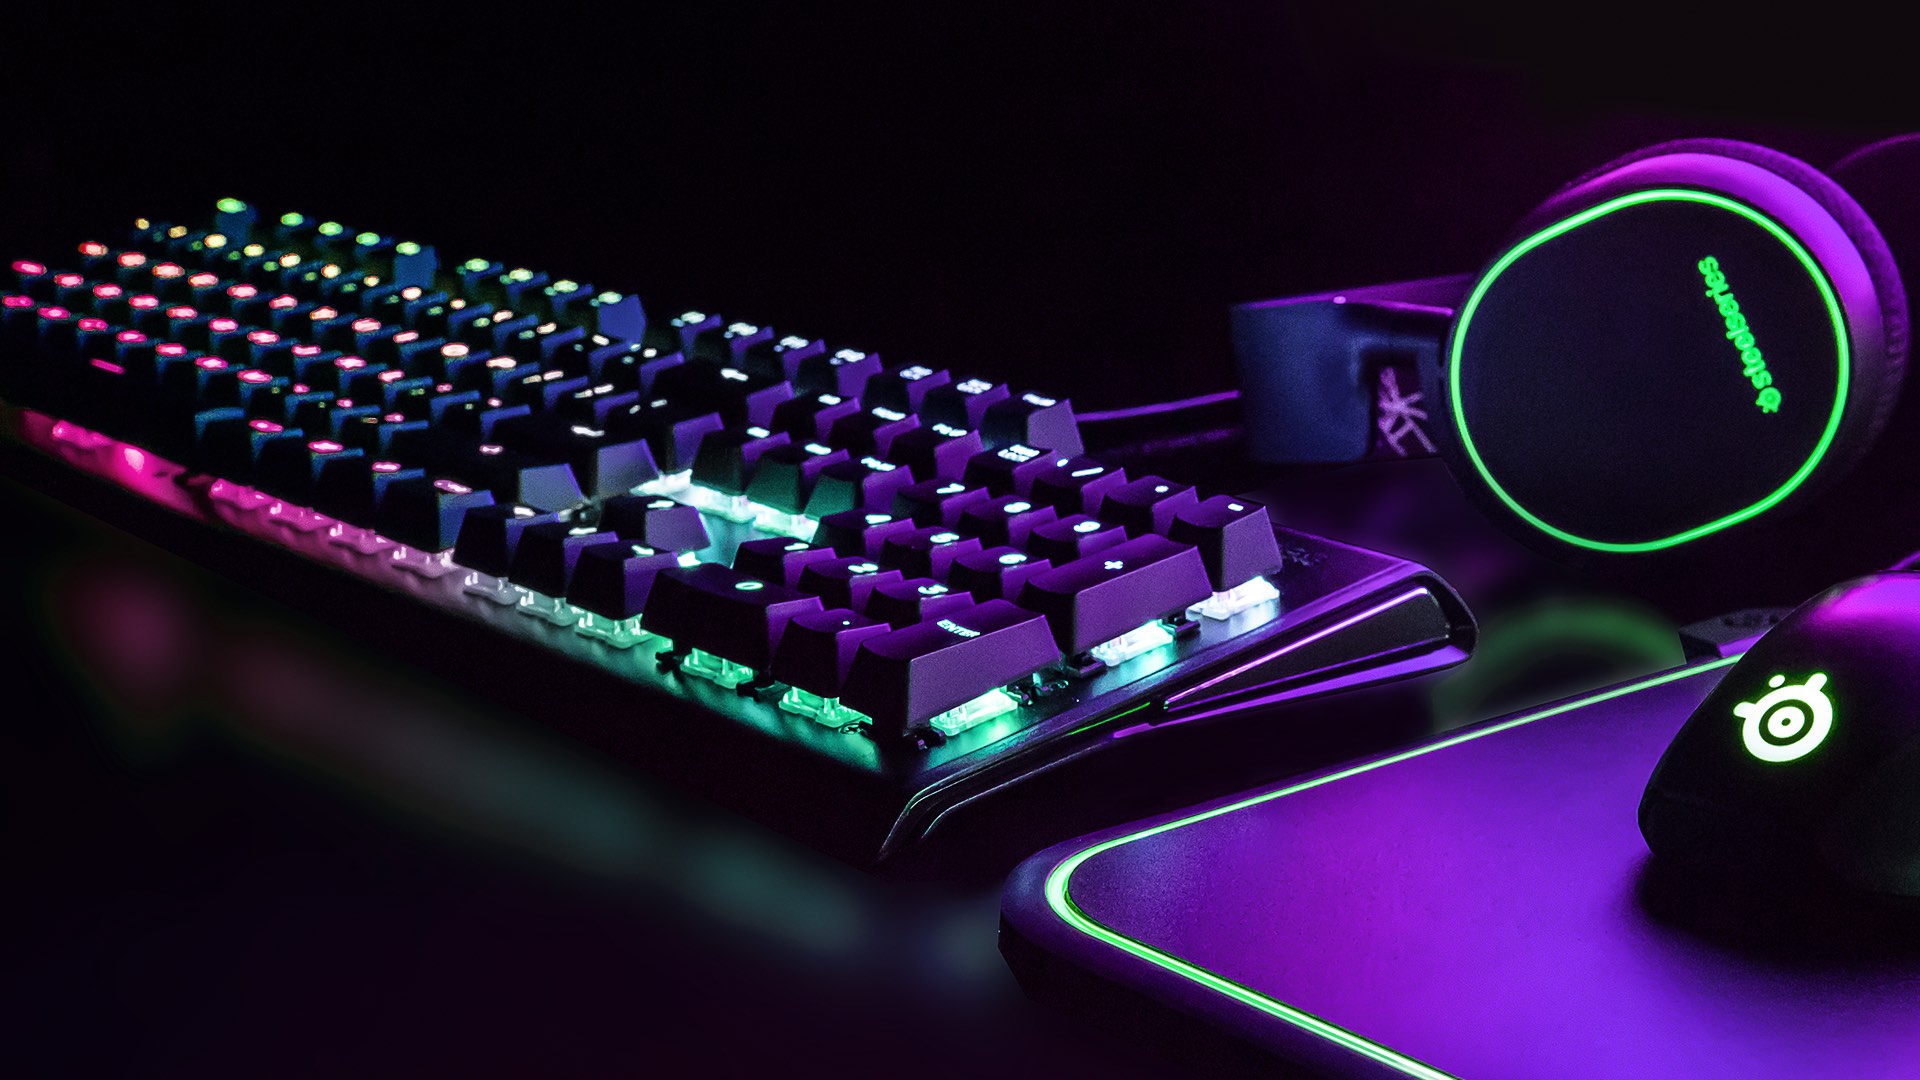 Profet endnu engang Repressalier SteelSeries Releases 'The Complete Package', Mechanical Gaming Keyboard -  the APEX M750